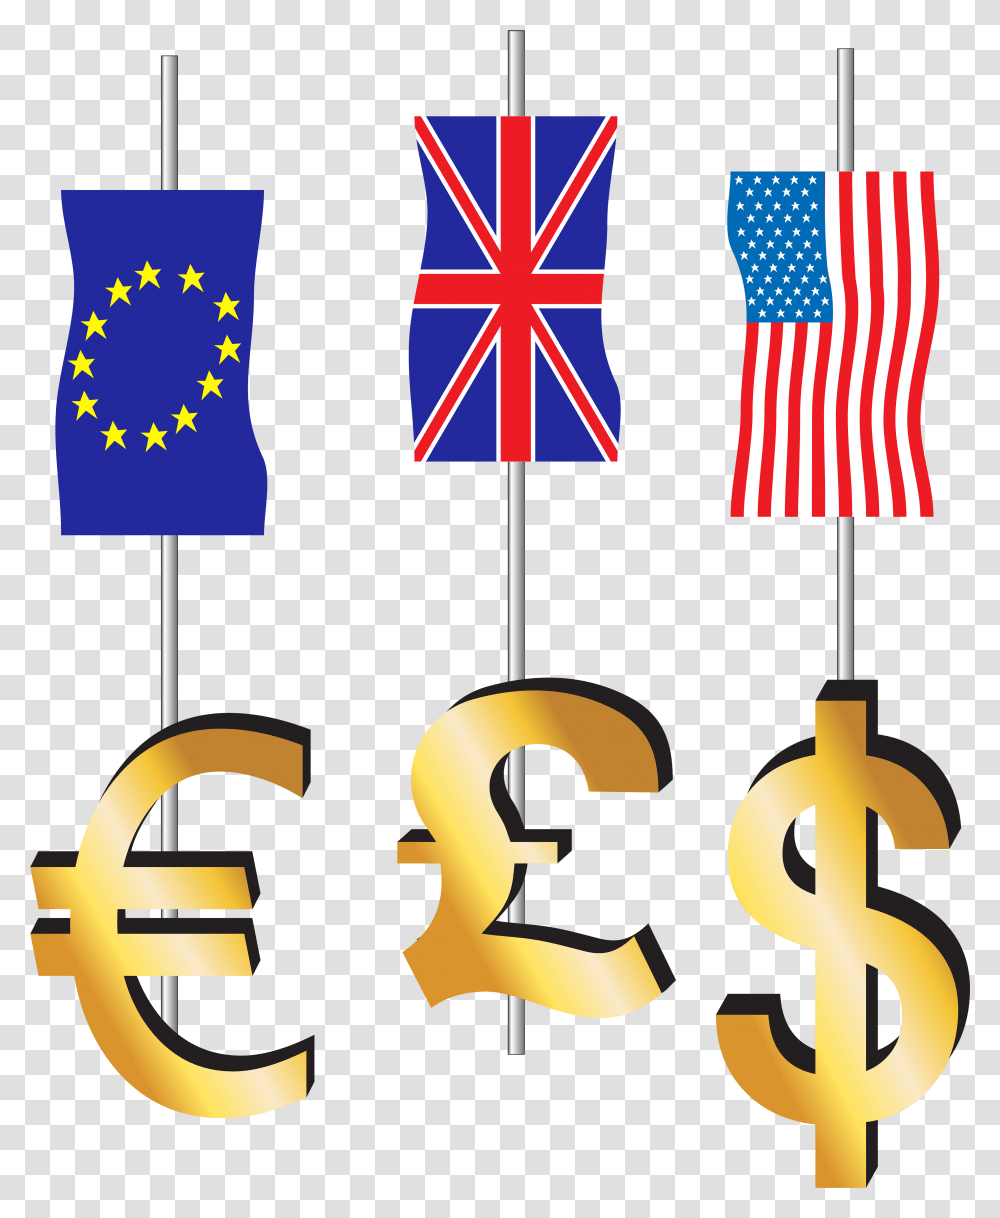 Euro Pound Dollar Signs And Flags Clipart Dollar Pound And Euro Signs, Number, Alphabet Transparent Png